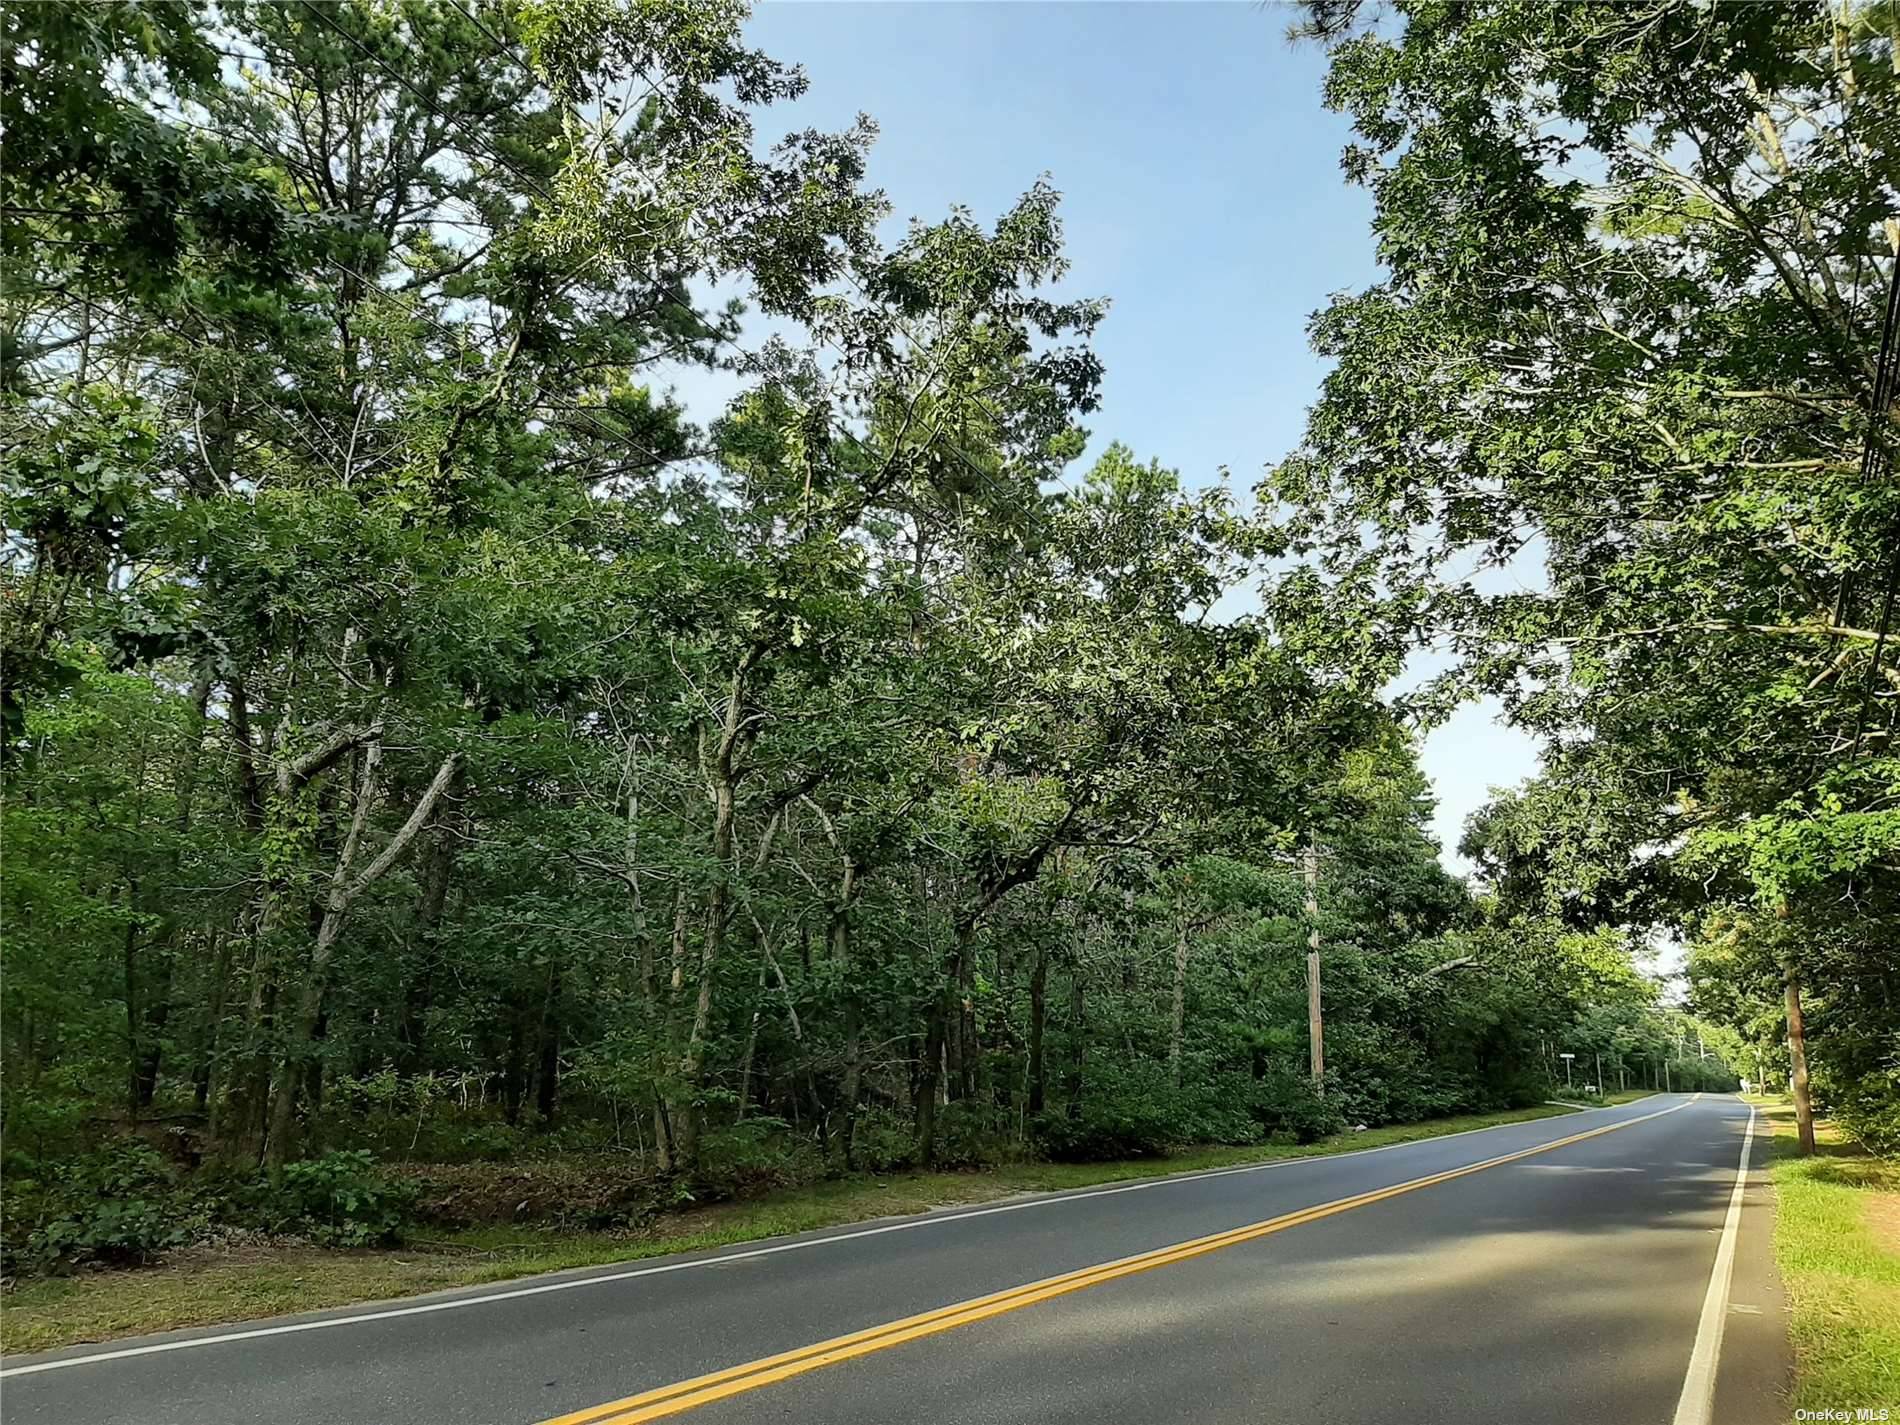 6. 5 Acres located in the quiet picturesque Hamlet of East Quogue, Southampton Town.